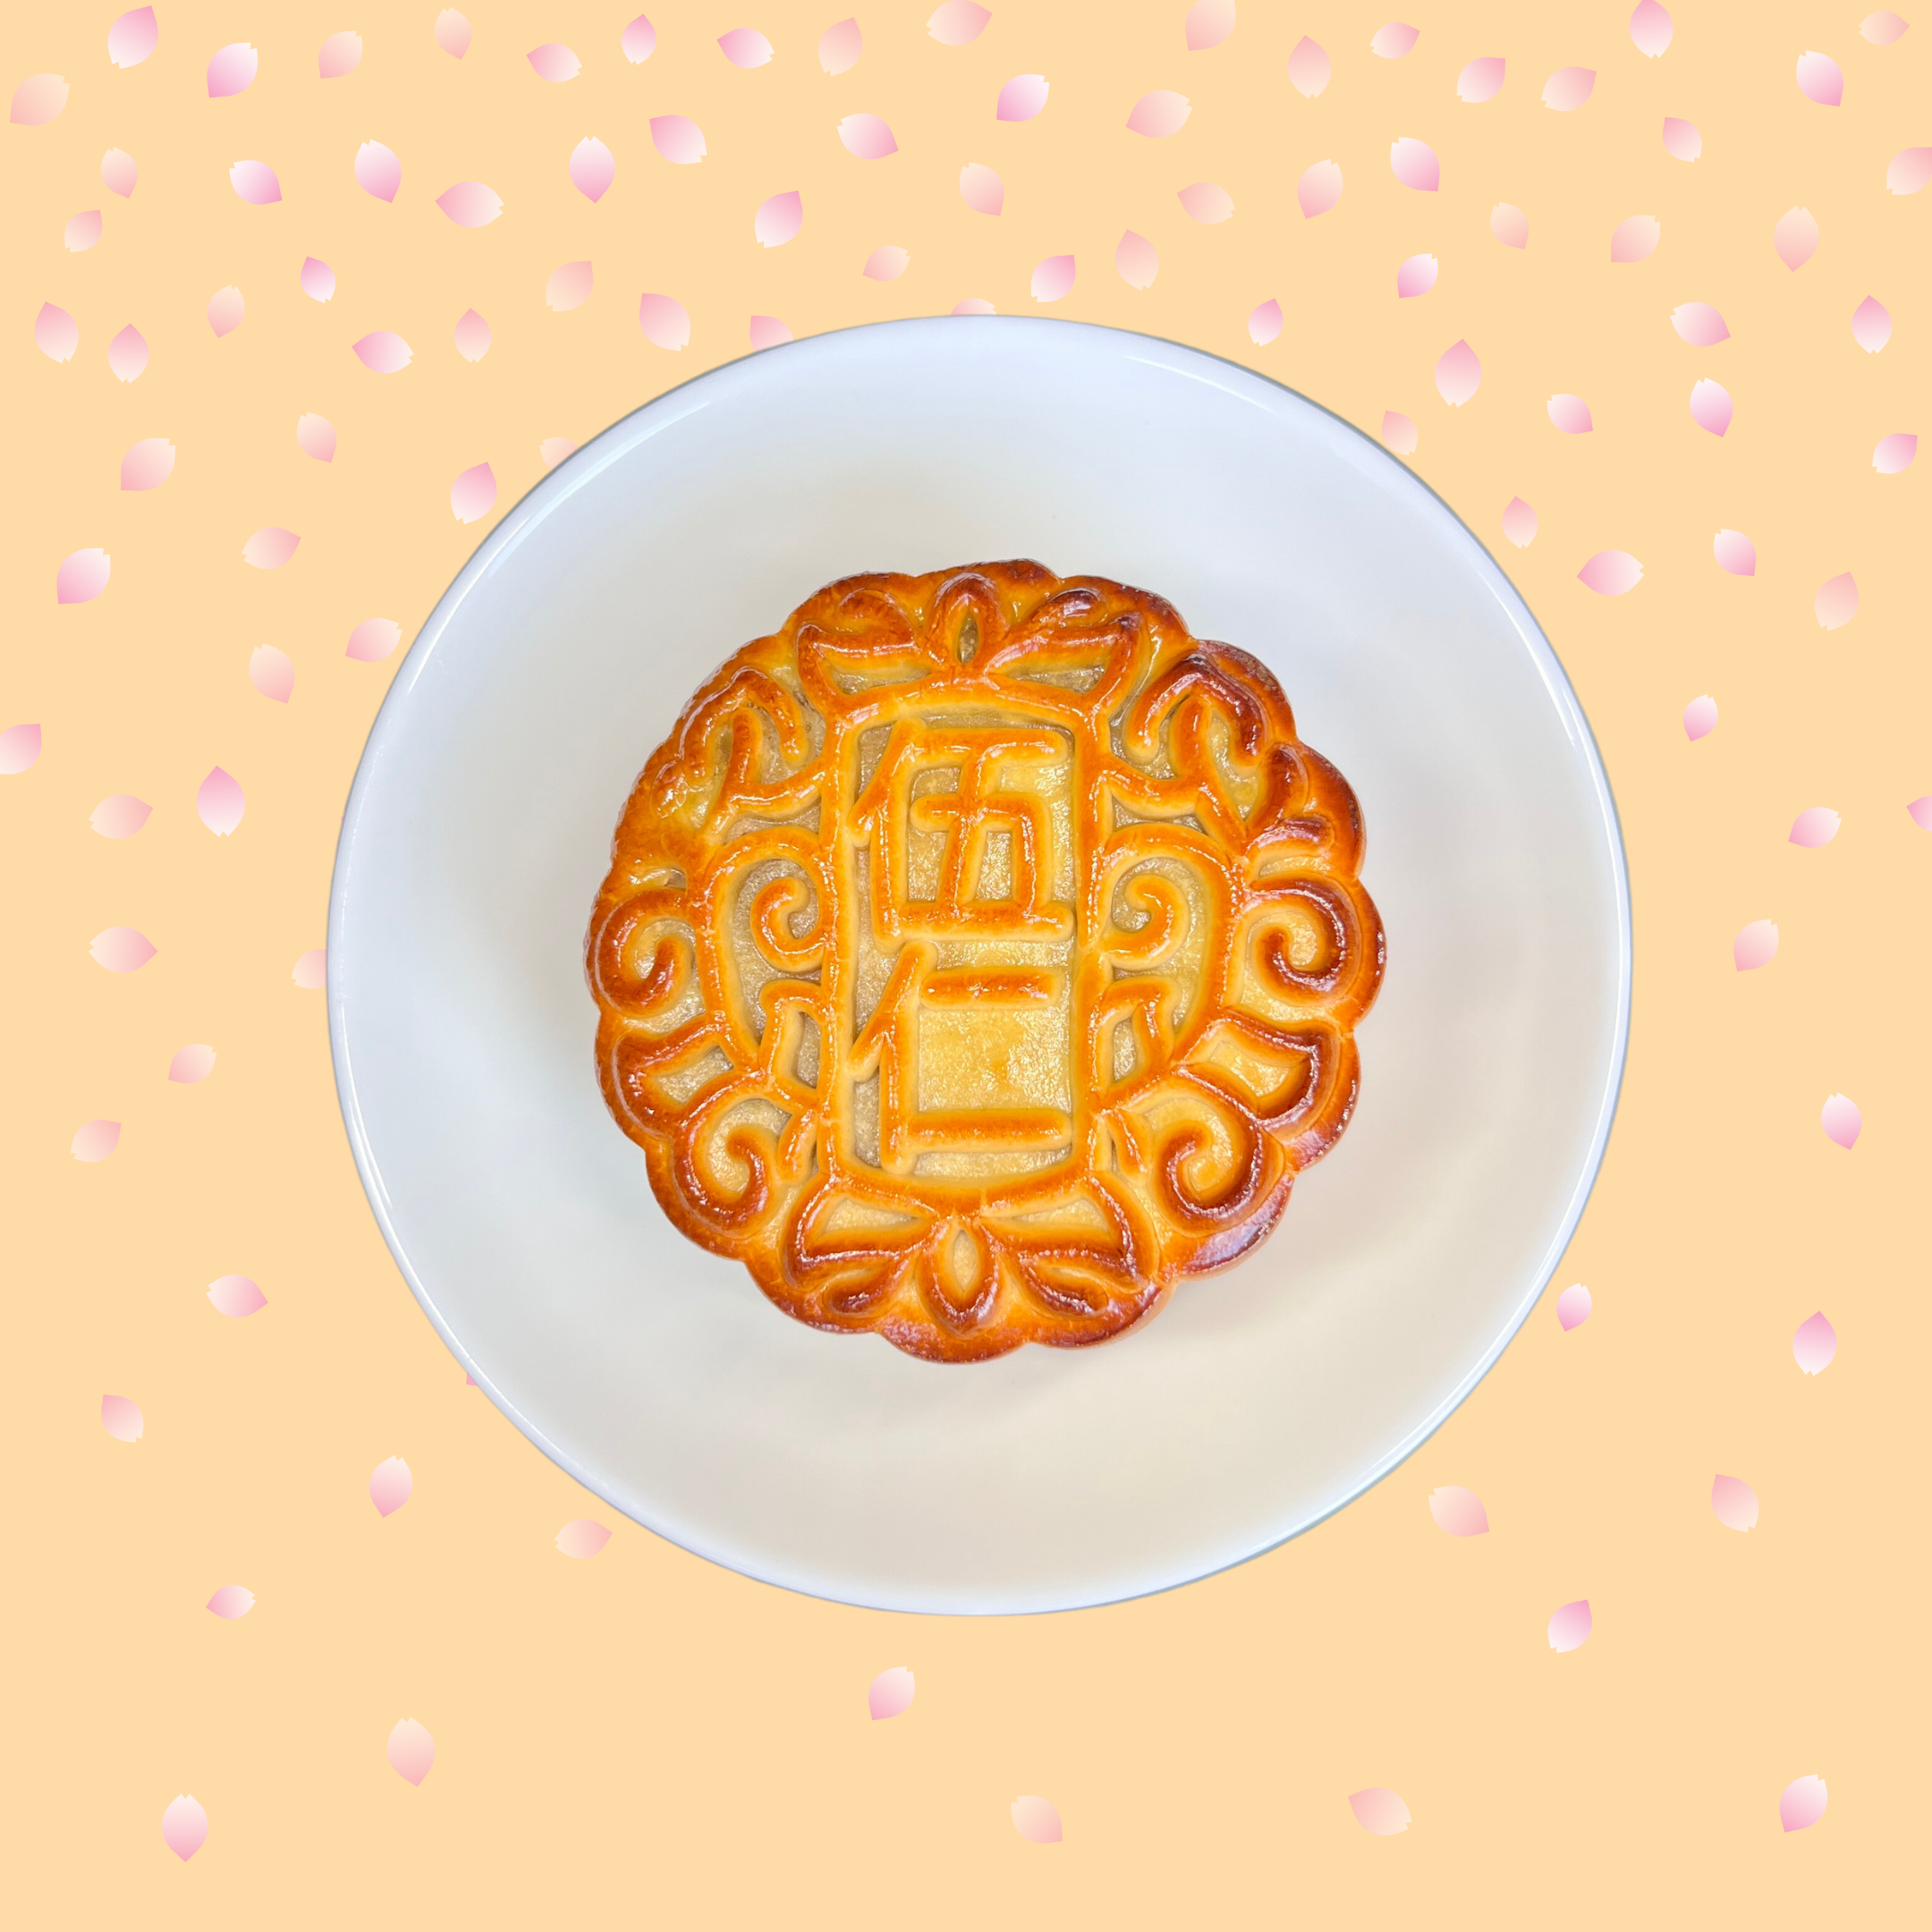 Mixed Nuts & Fruits Mooncake (4 pieces)